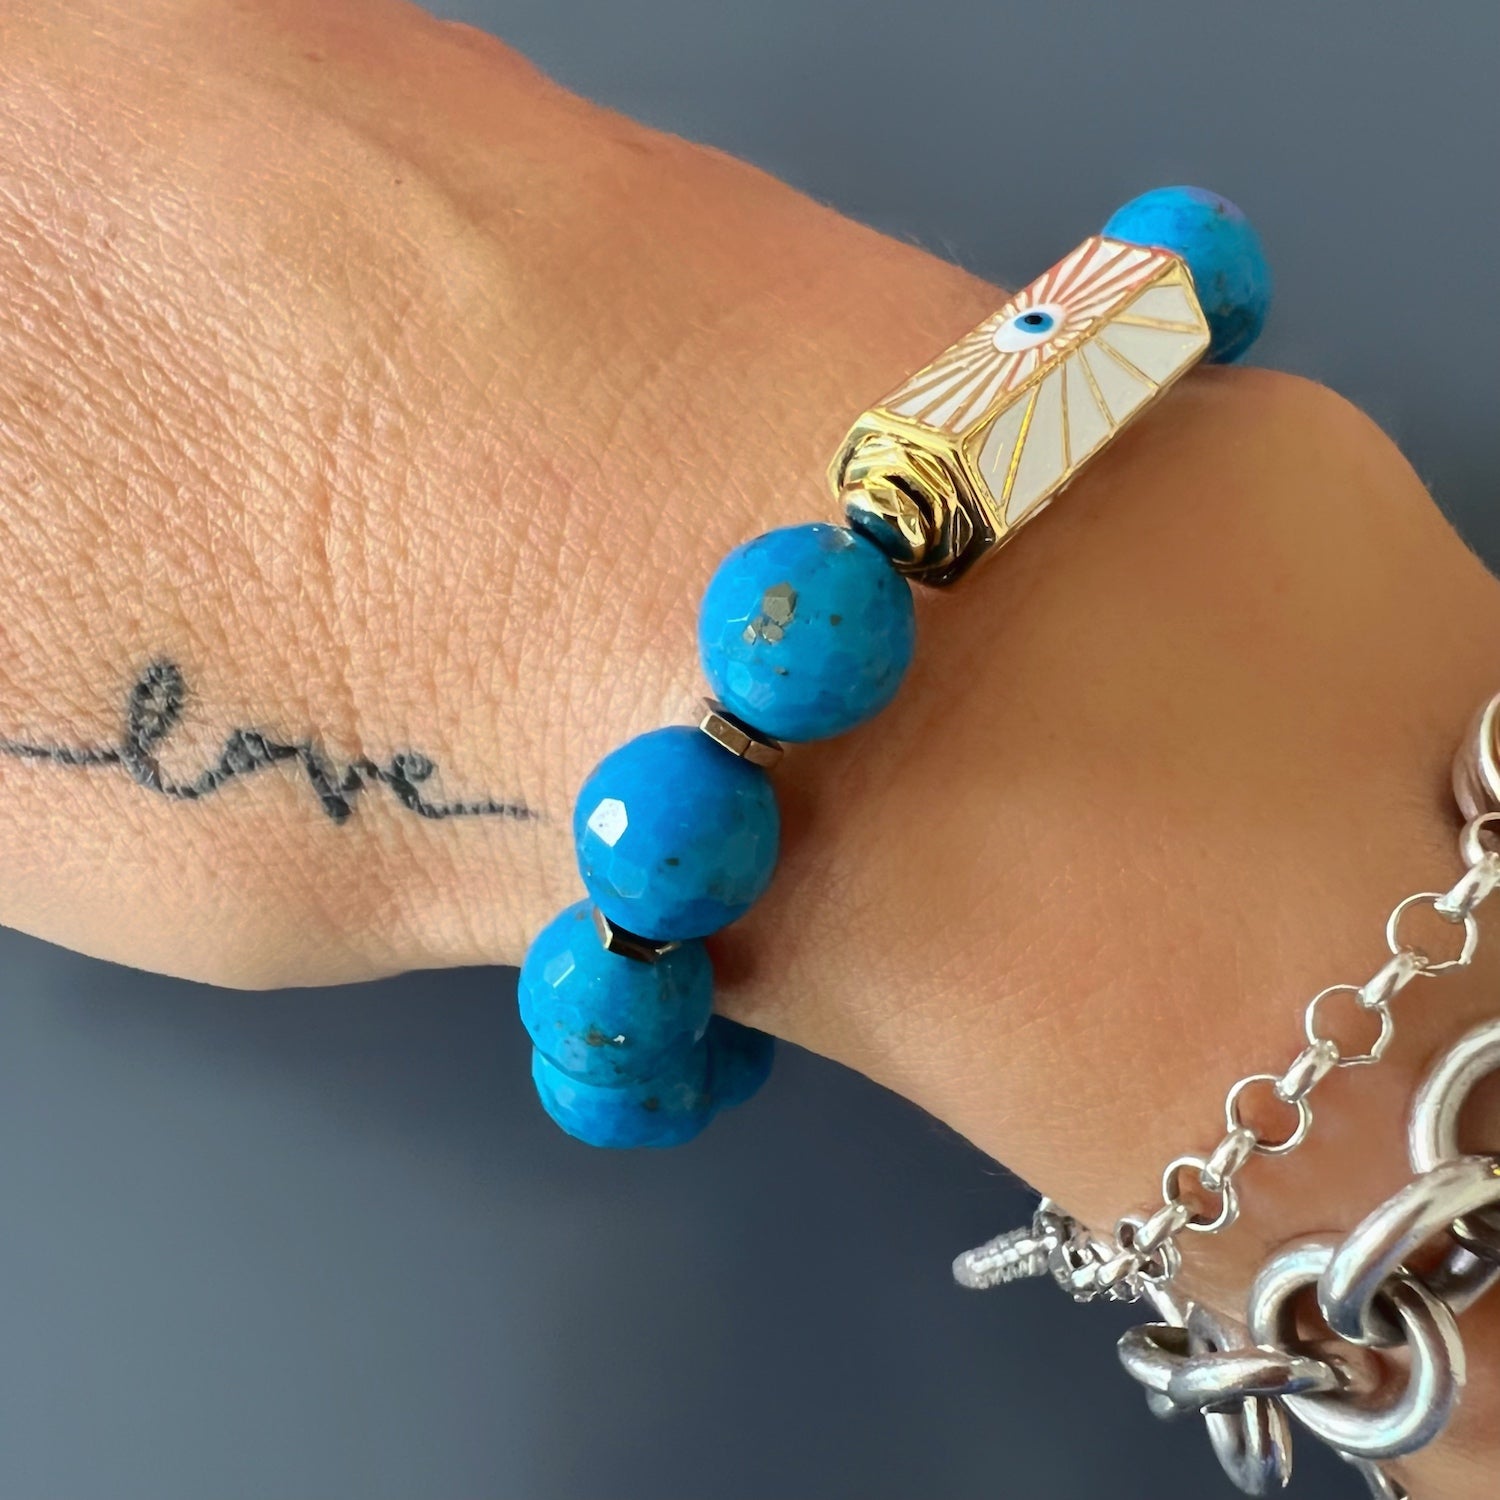 With the Turquoise Luck and Protection Bracelet on her wrist, the hand model exudes a sense of positivity and spiritual connection.